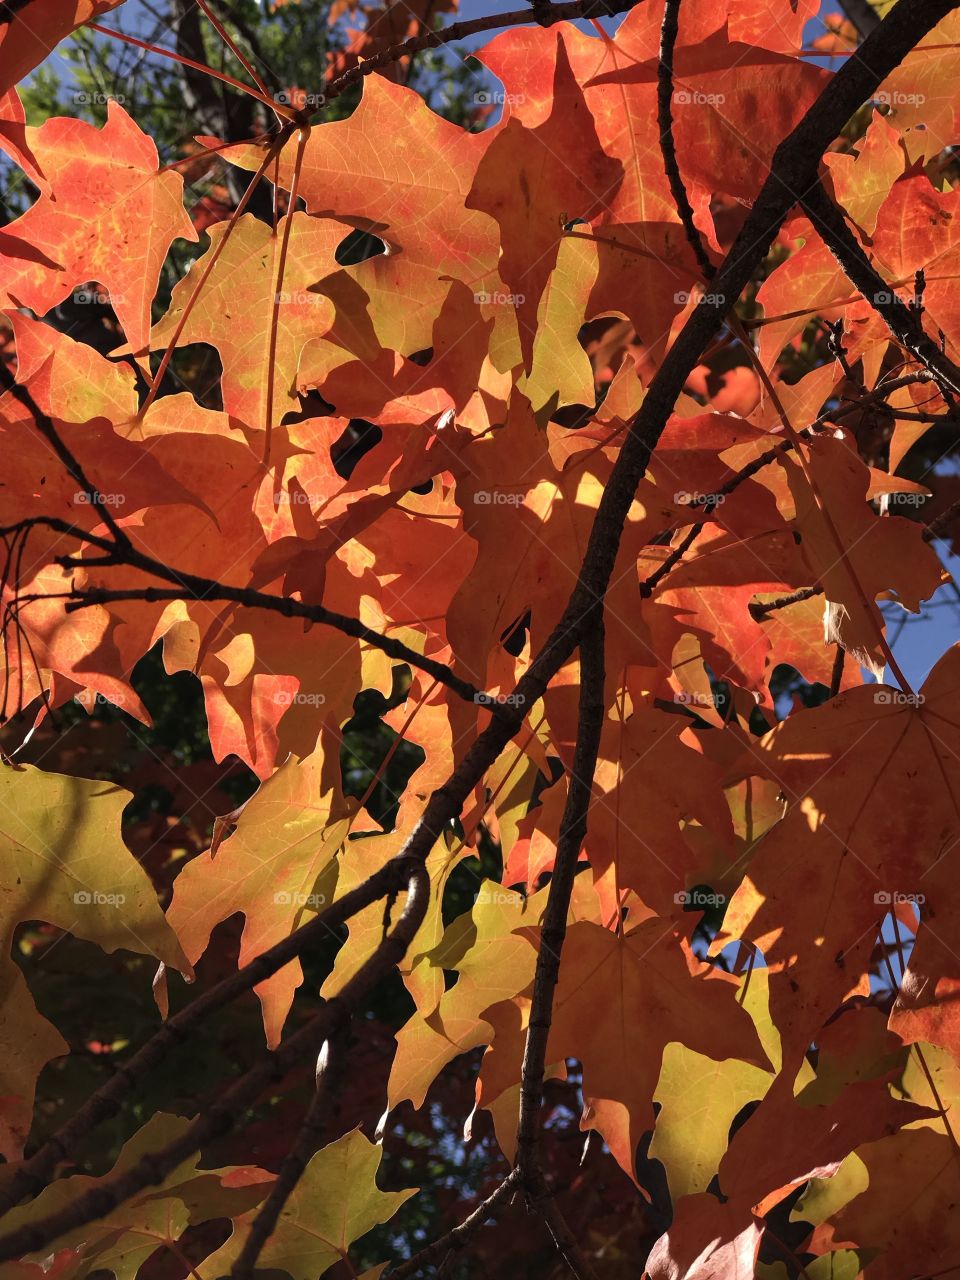 Fall leaves on a branch illuminated by the sun show their texture and brilliant colors of red, orange, yellow and gold. 